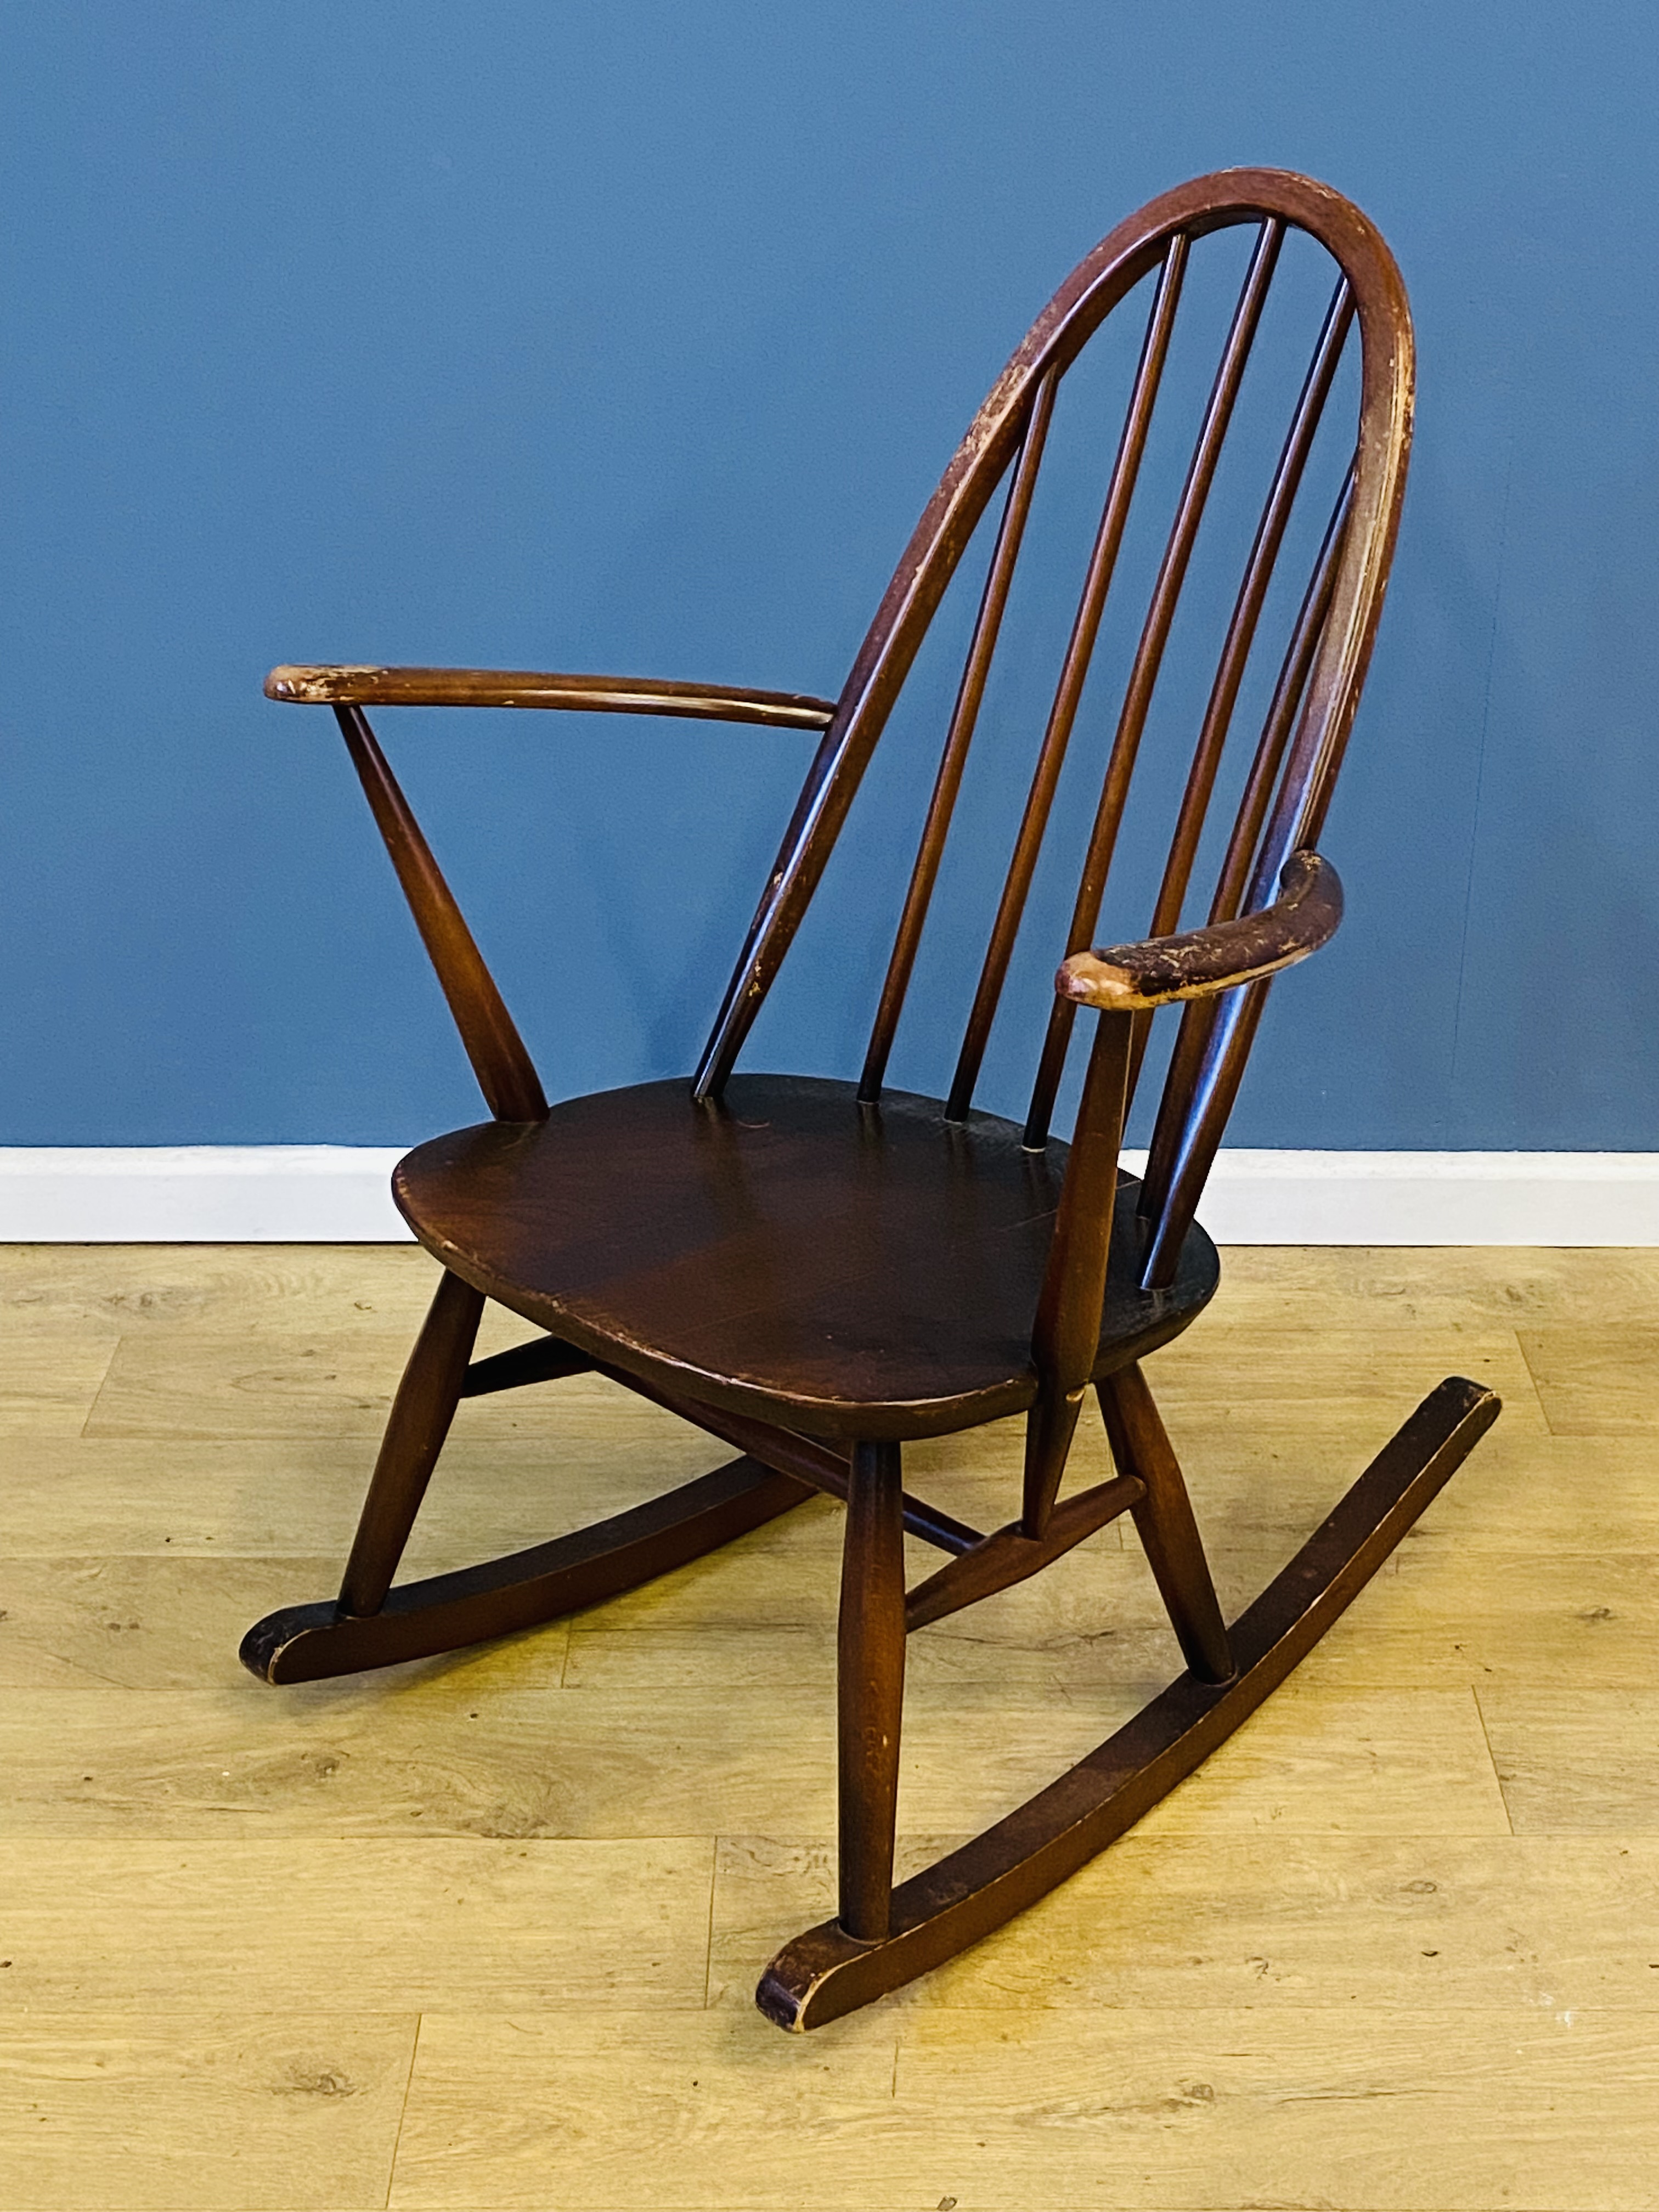 Ercol style childs rocking chair - Image 3 of 4